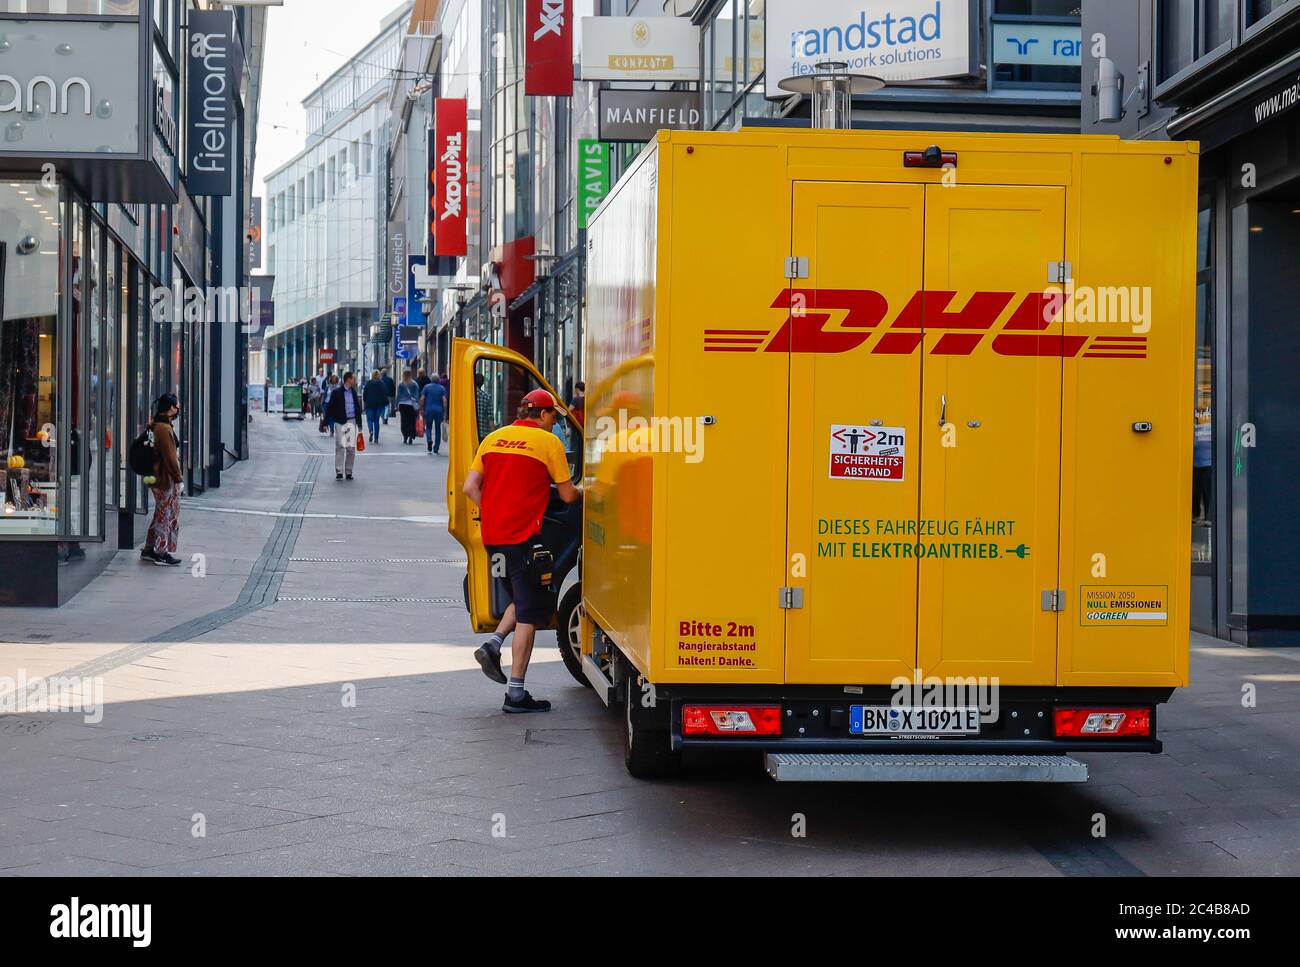 DHL parcel trolleys in the pedestrian zone in front of shops and stores ...